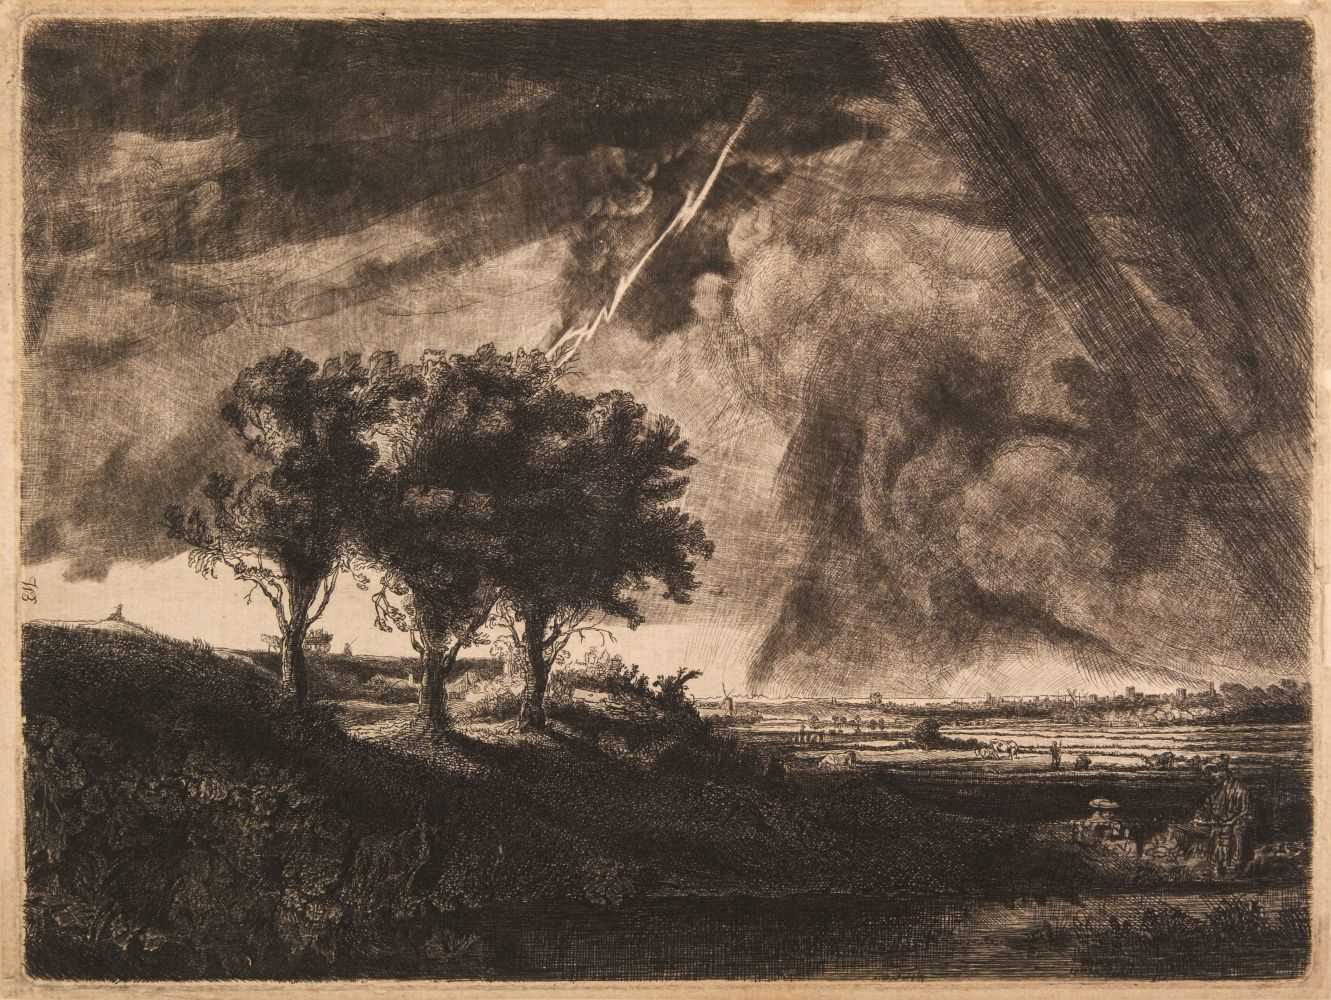 Lot 370 - Baillie (Captain William, 1723-1810). The Three Trees after Rembrandt, 1758